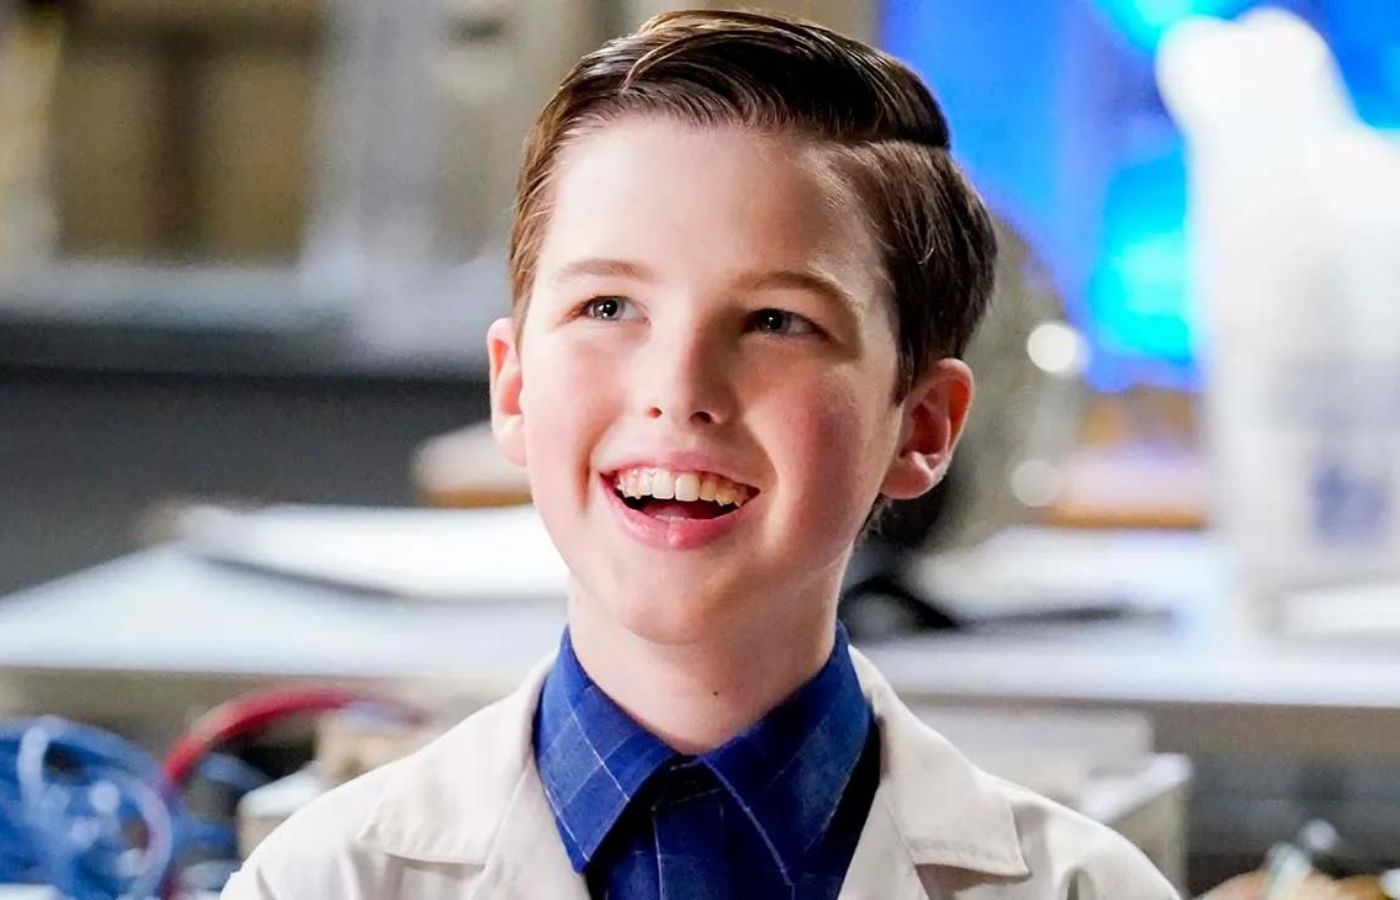 Big Bang Theory spin-off Young Sheldon confirmed to be ending